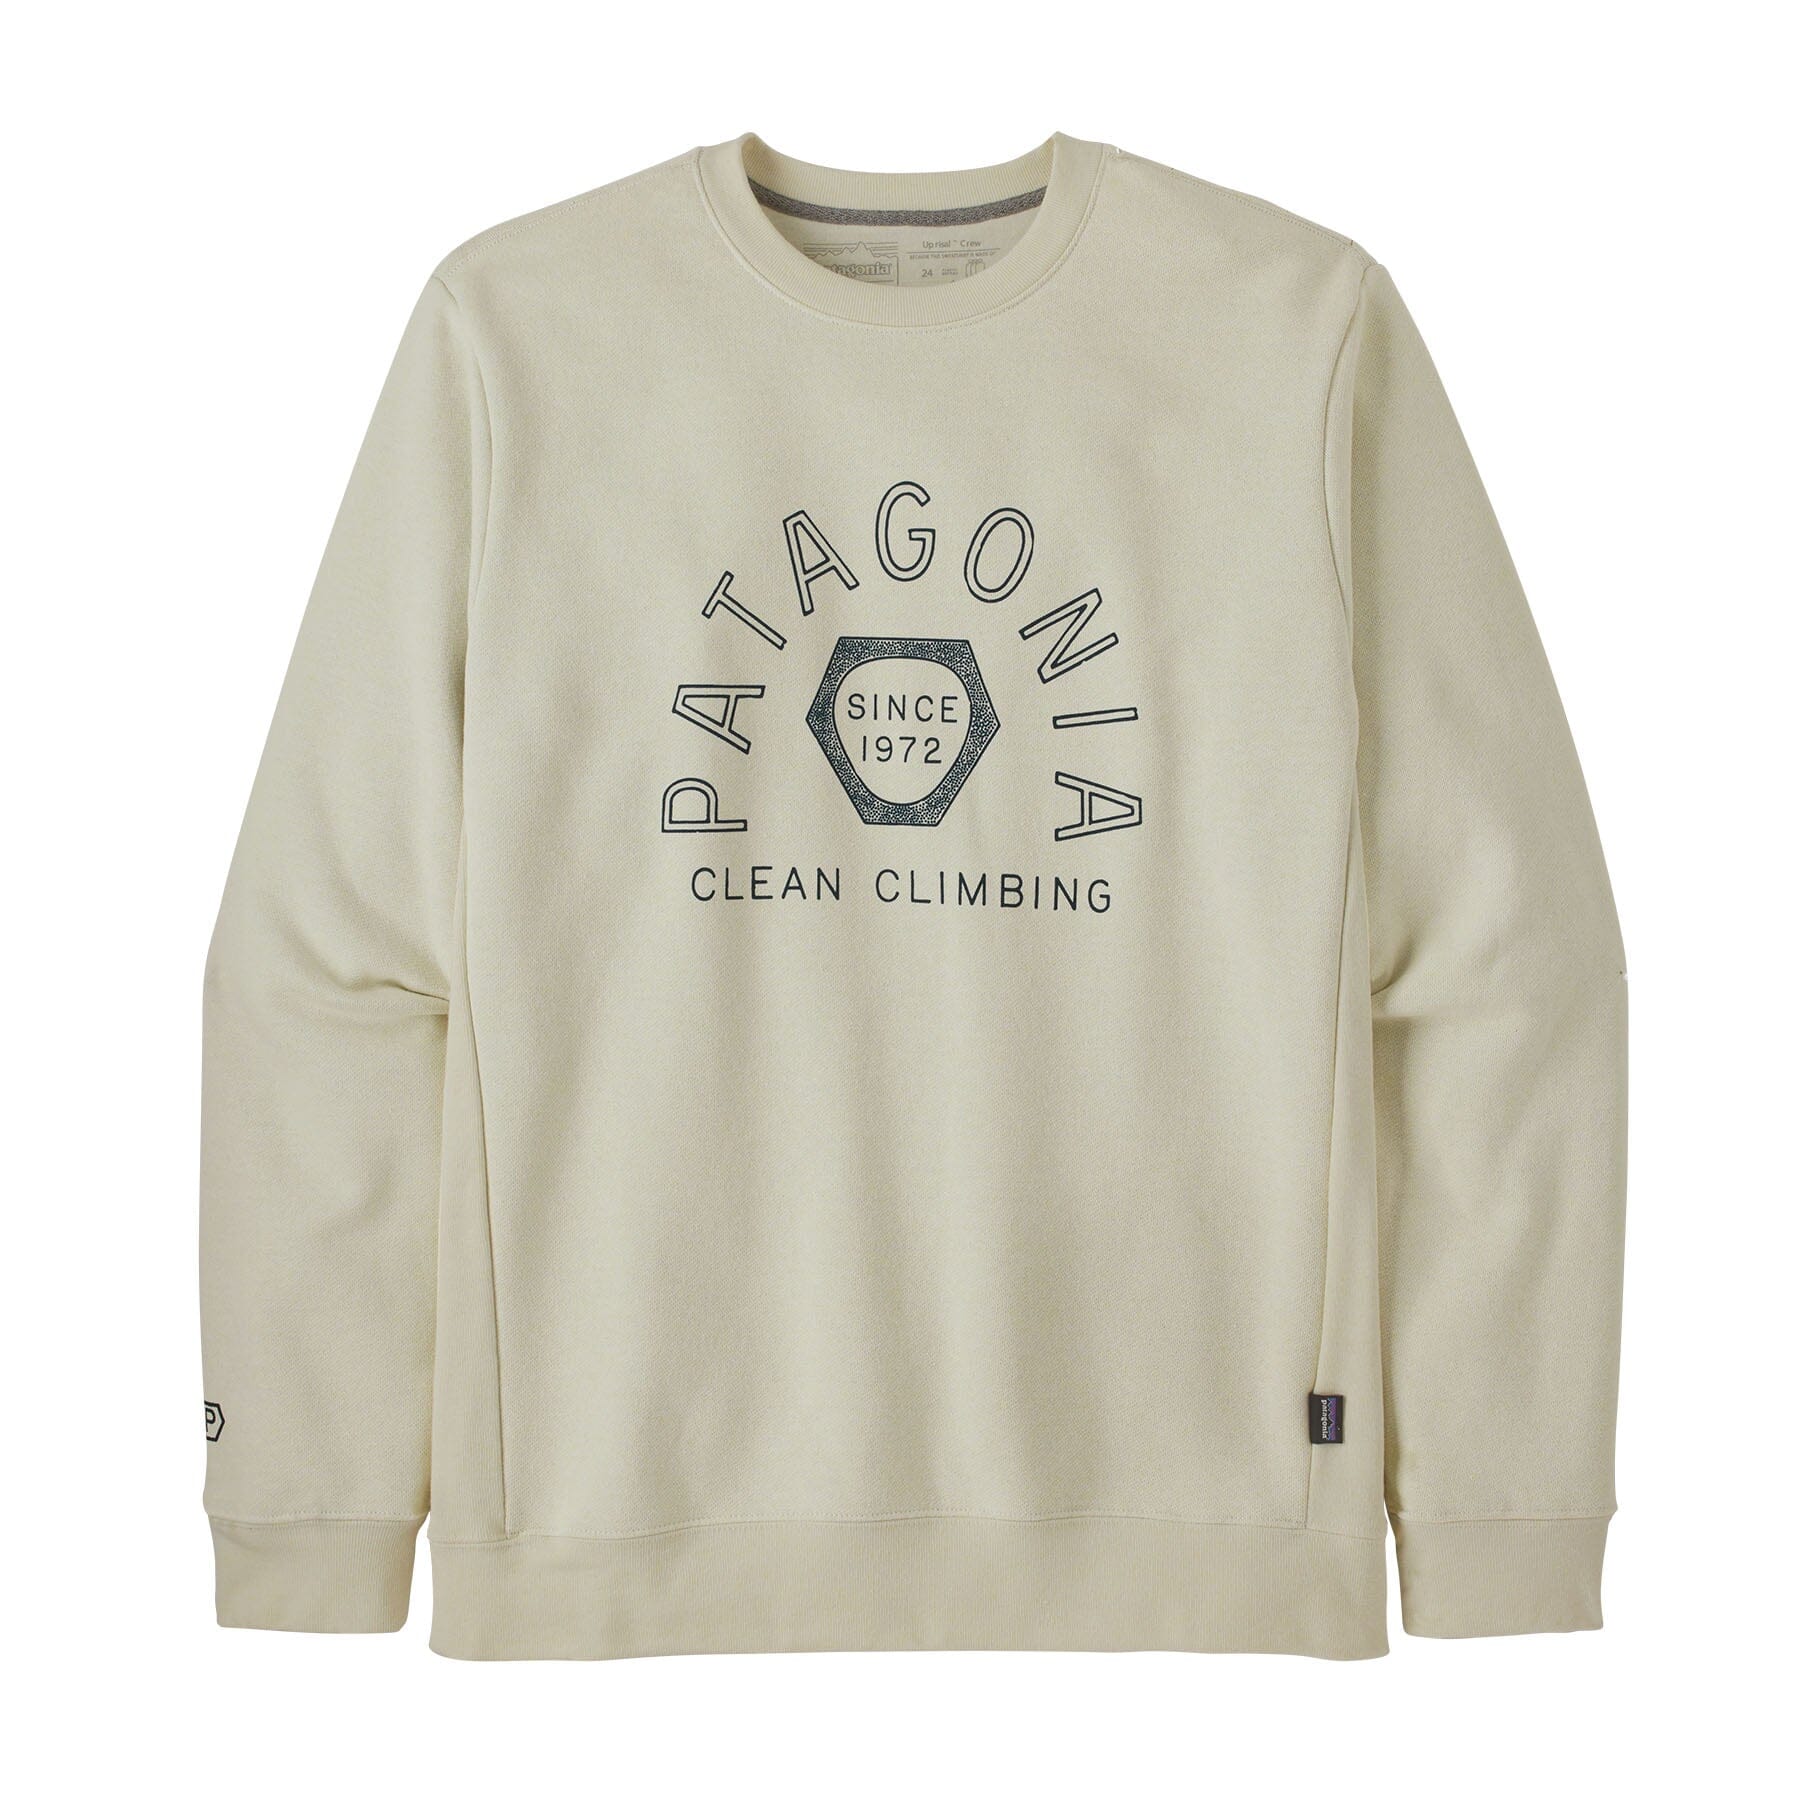 Crew　Hex　Recycled　sportswear　Weekendbee　Patagonia　Sweatshirt　–　Cotton　sustainable　PET　Recycled　Climb　Clean　ユニセックス　Uprisal